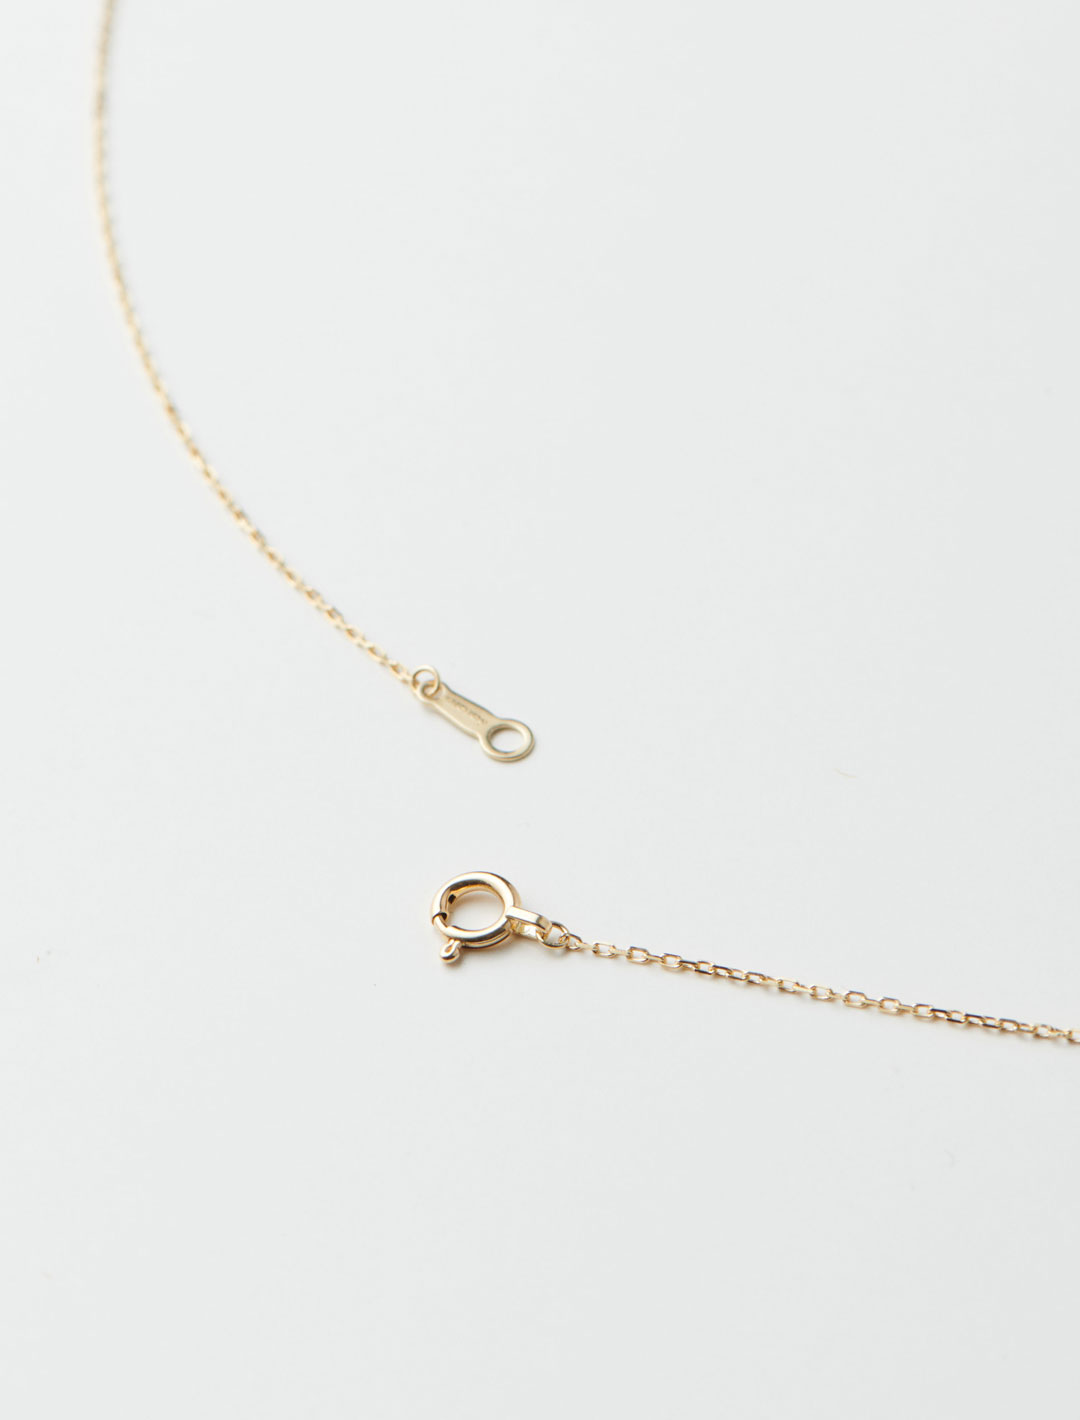 gyoku Necklace S 45cm - Yellow Gold